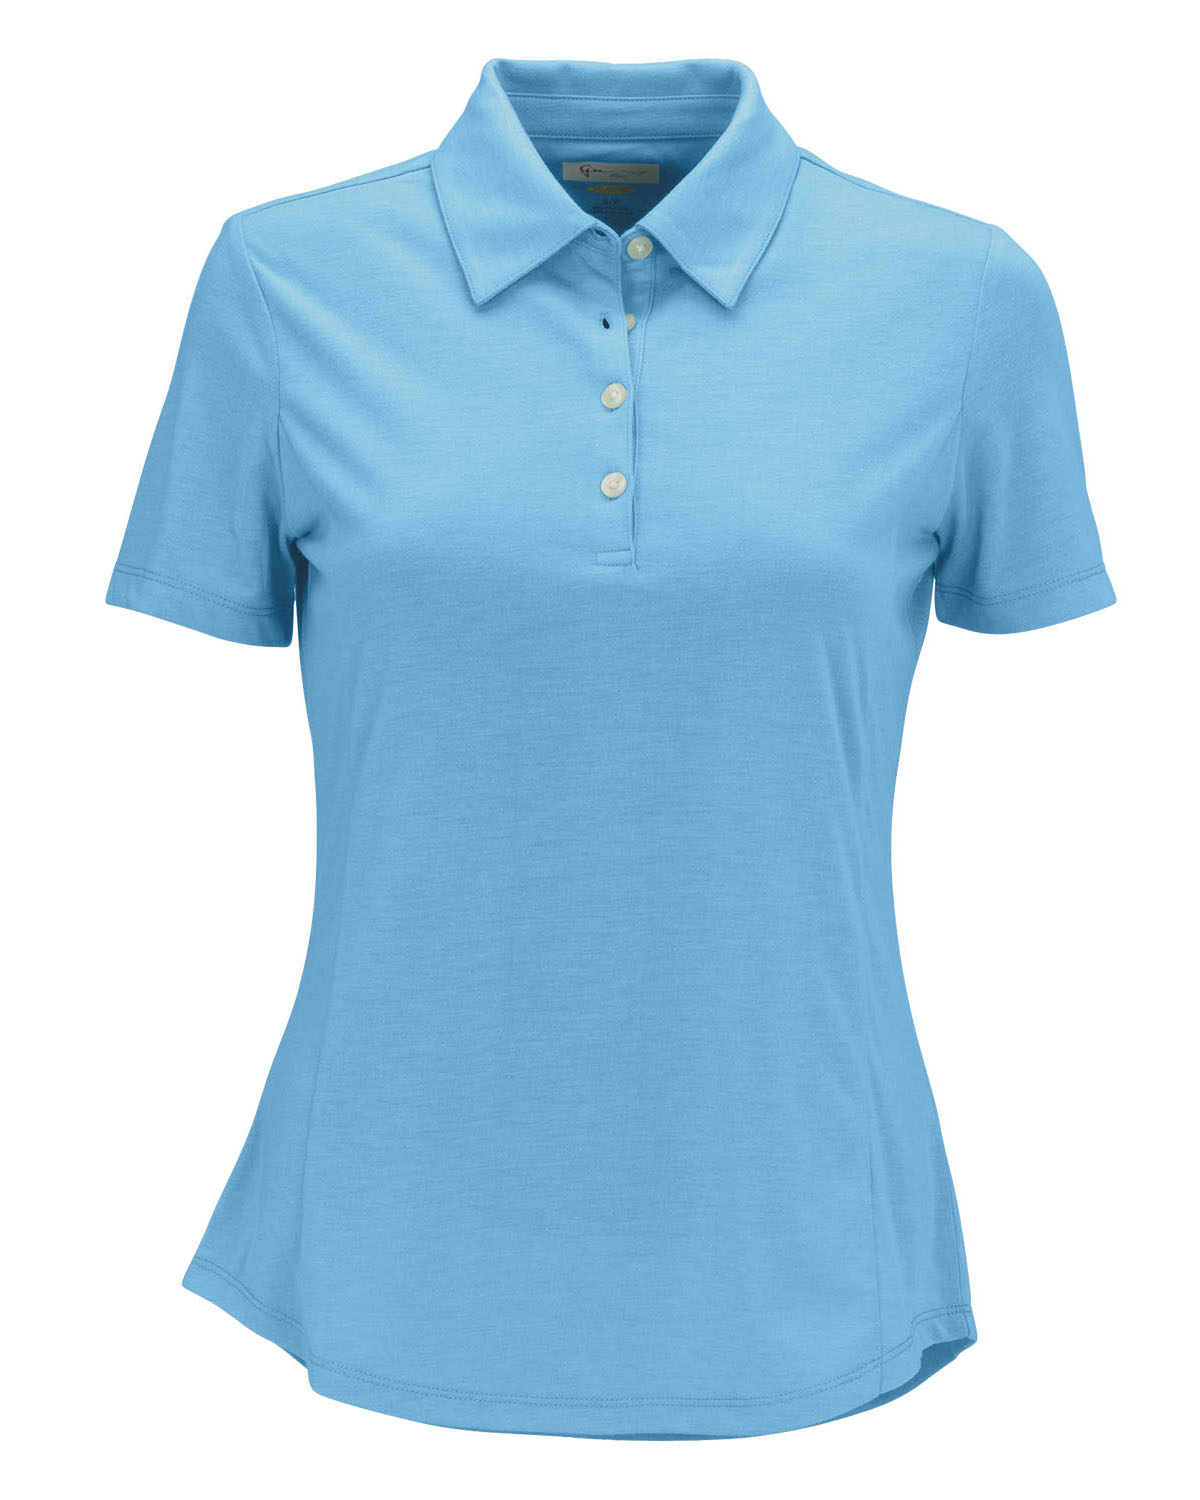 'Greg Norman WNS8K466 Women's Play Dry Foreward Series Polo'